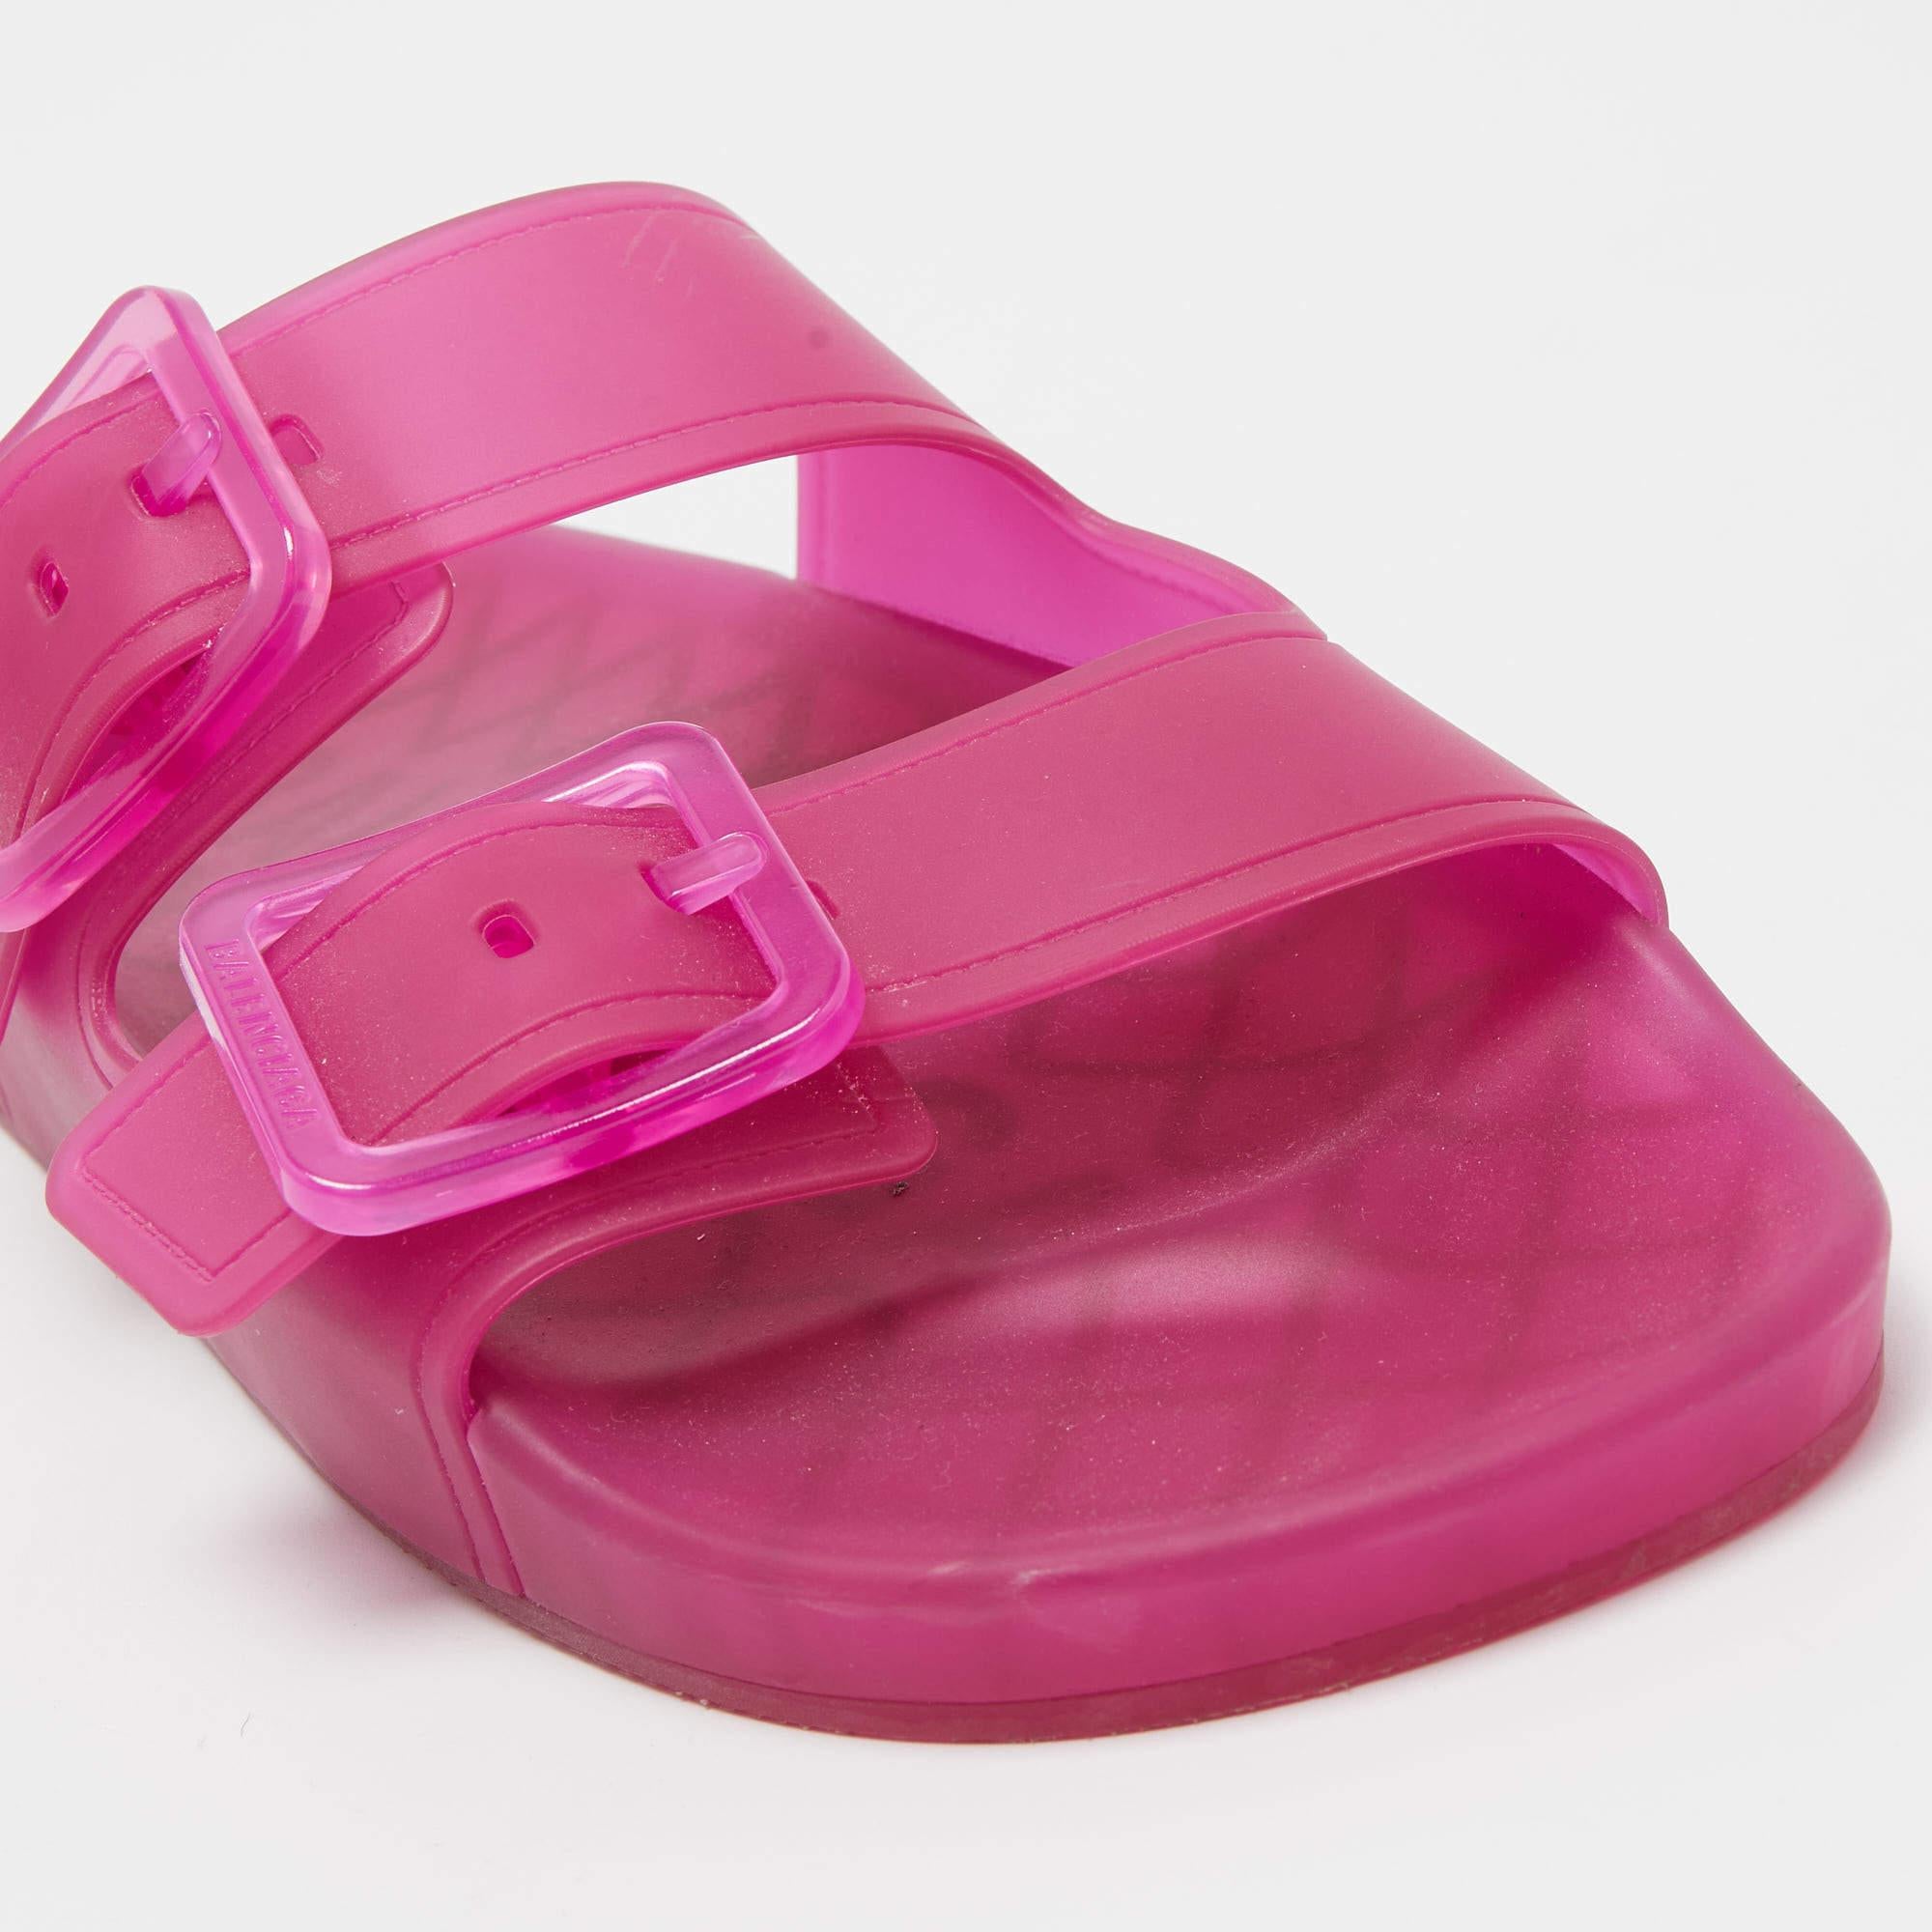 Balenciaga Pink Rubber Double Buckle Detail Flat Sandals Size 38 For Sale 4